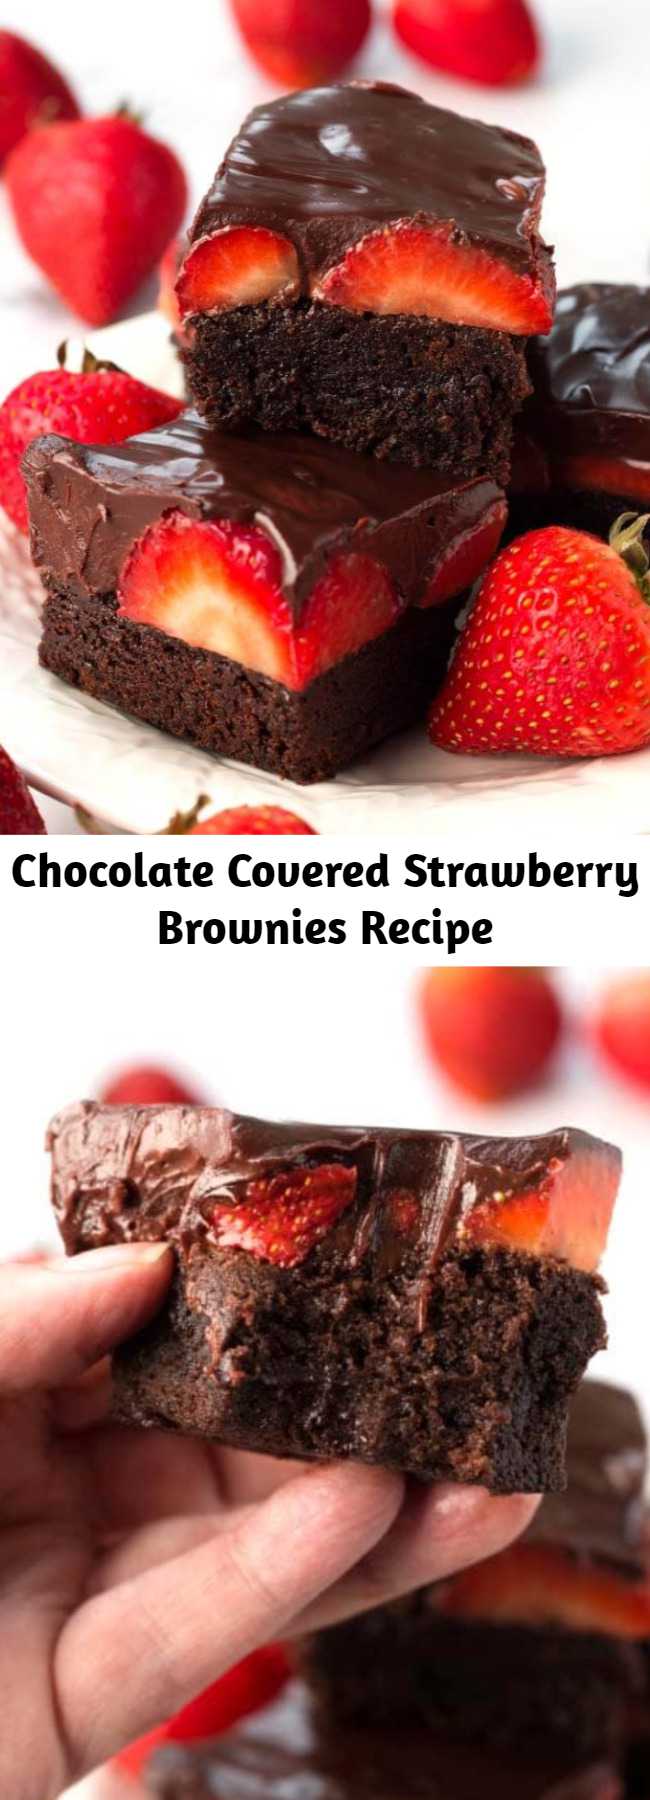 Chocolate Covered Strawberry Brownies Recipe - Chocolate Covered Strawberry Brownies are a delicious, chocolatey dessert recipe. If you like rich, chocolate brownies, then you will love these chocolate ganache strawberry covered brownies! #brownies #chocolate #chocolatecoveredstrawberries